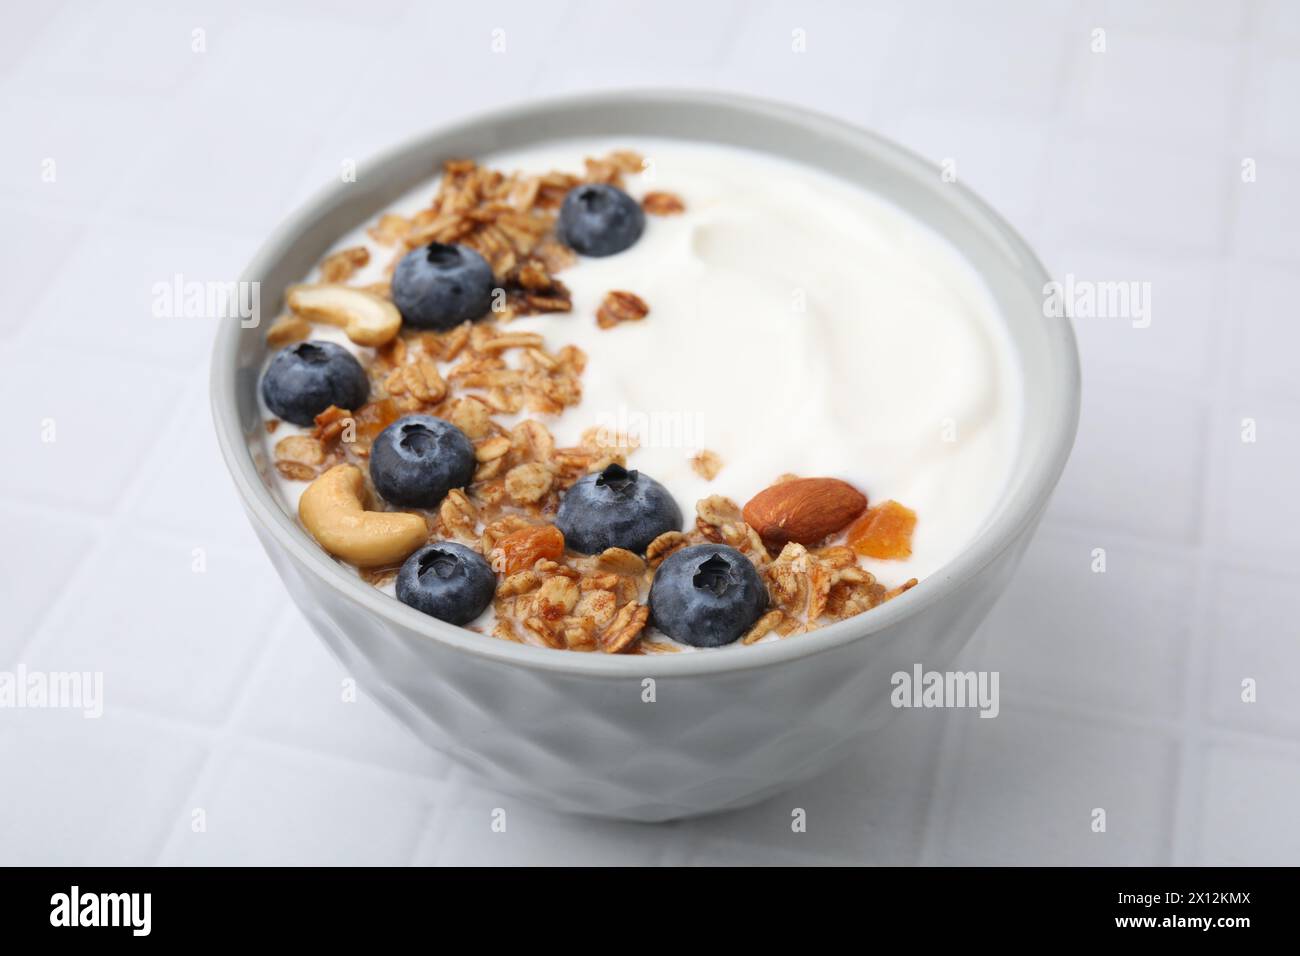 Bowl with yogurt, blueberries and granola on white tiled table, closeup Stock Photo